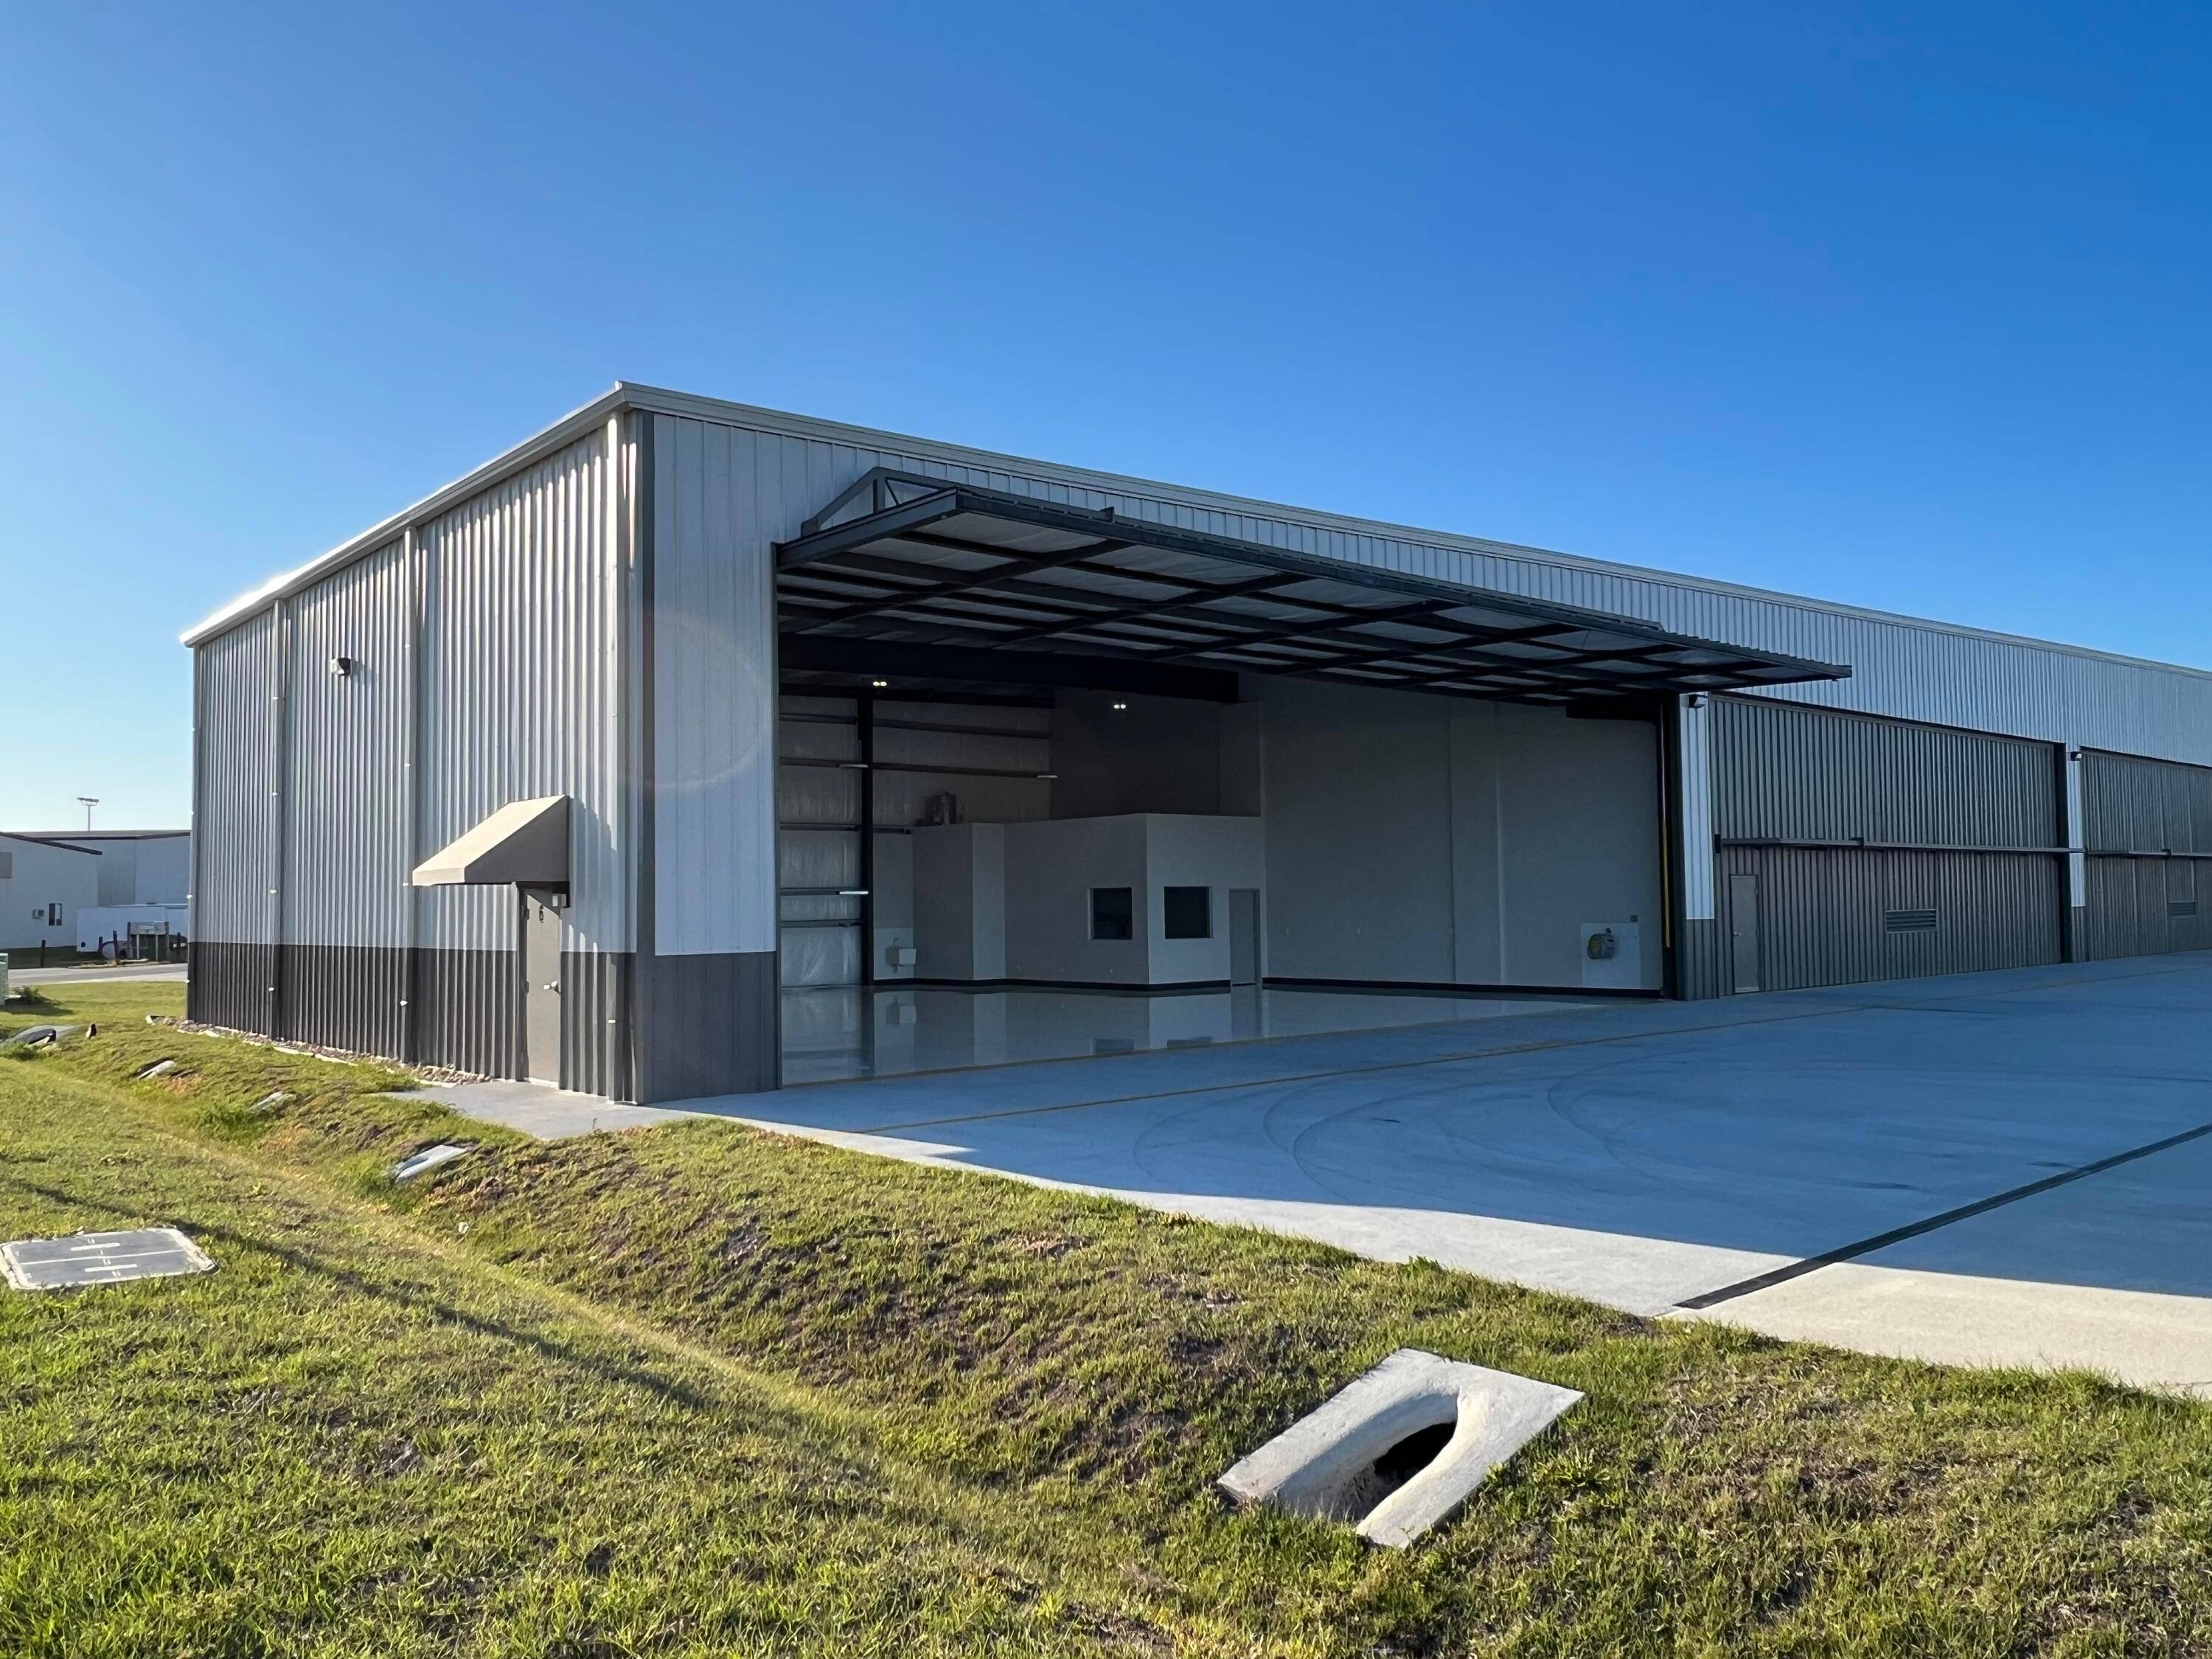 This BRAND NEW state of the art hangar boasts a spacious 65'W x 60'D floor plan, providing ample room for aircraft storage and maintenance located at Ormond Beach Municipal Airport ...